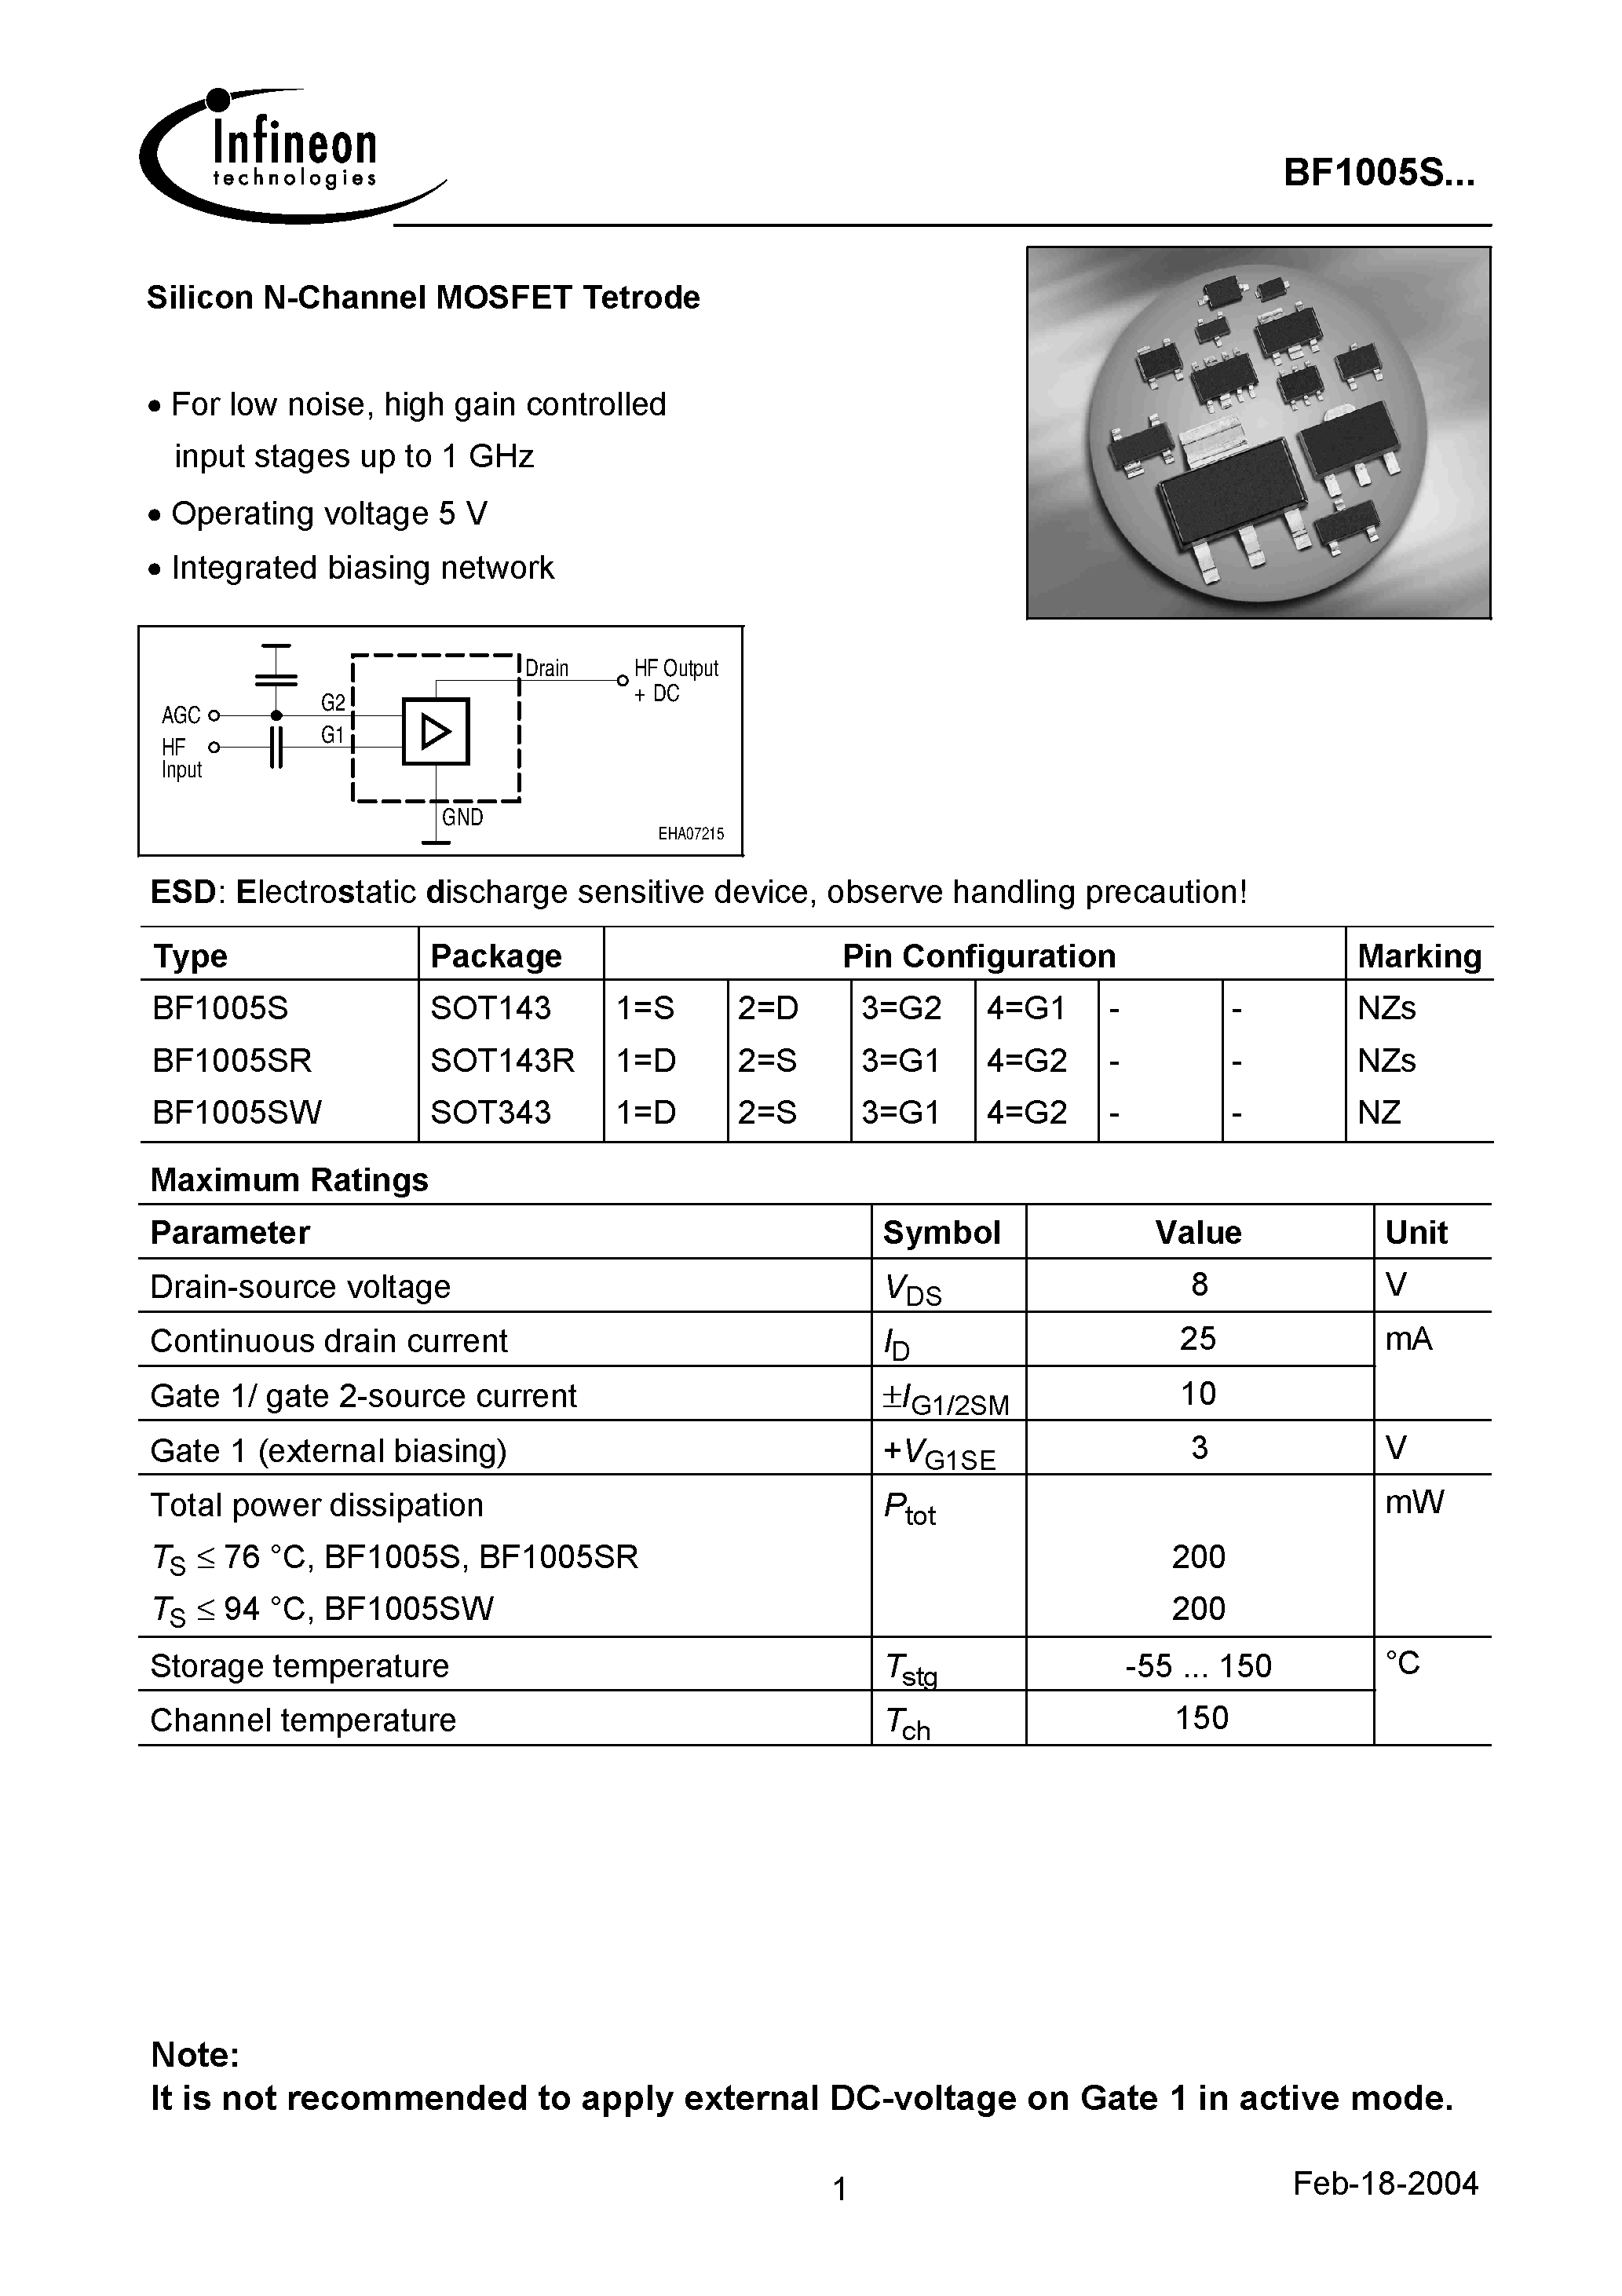 Datasheet BF1005SW - Silicon N-Channel MOSFET Tetrode page 1